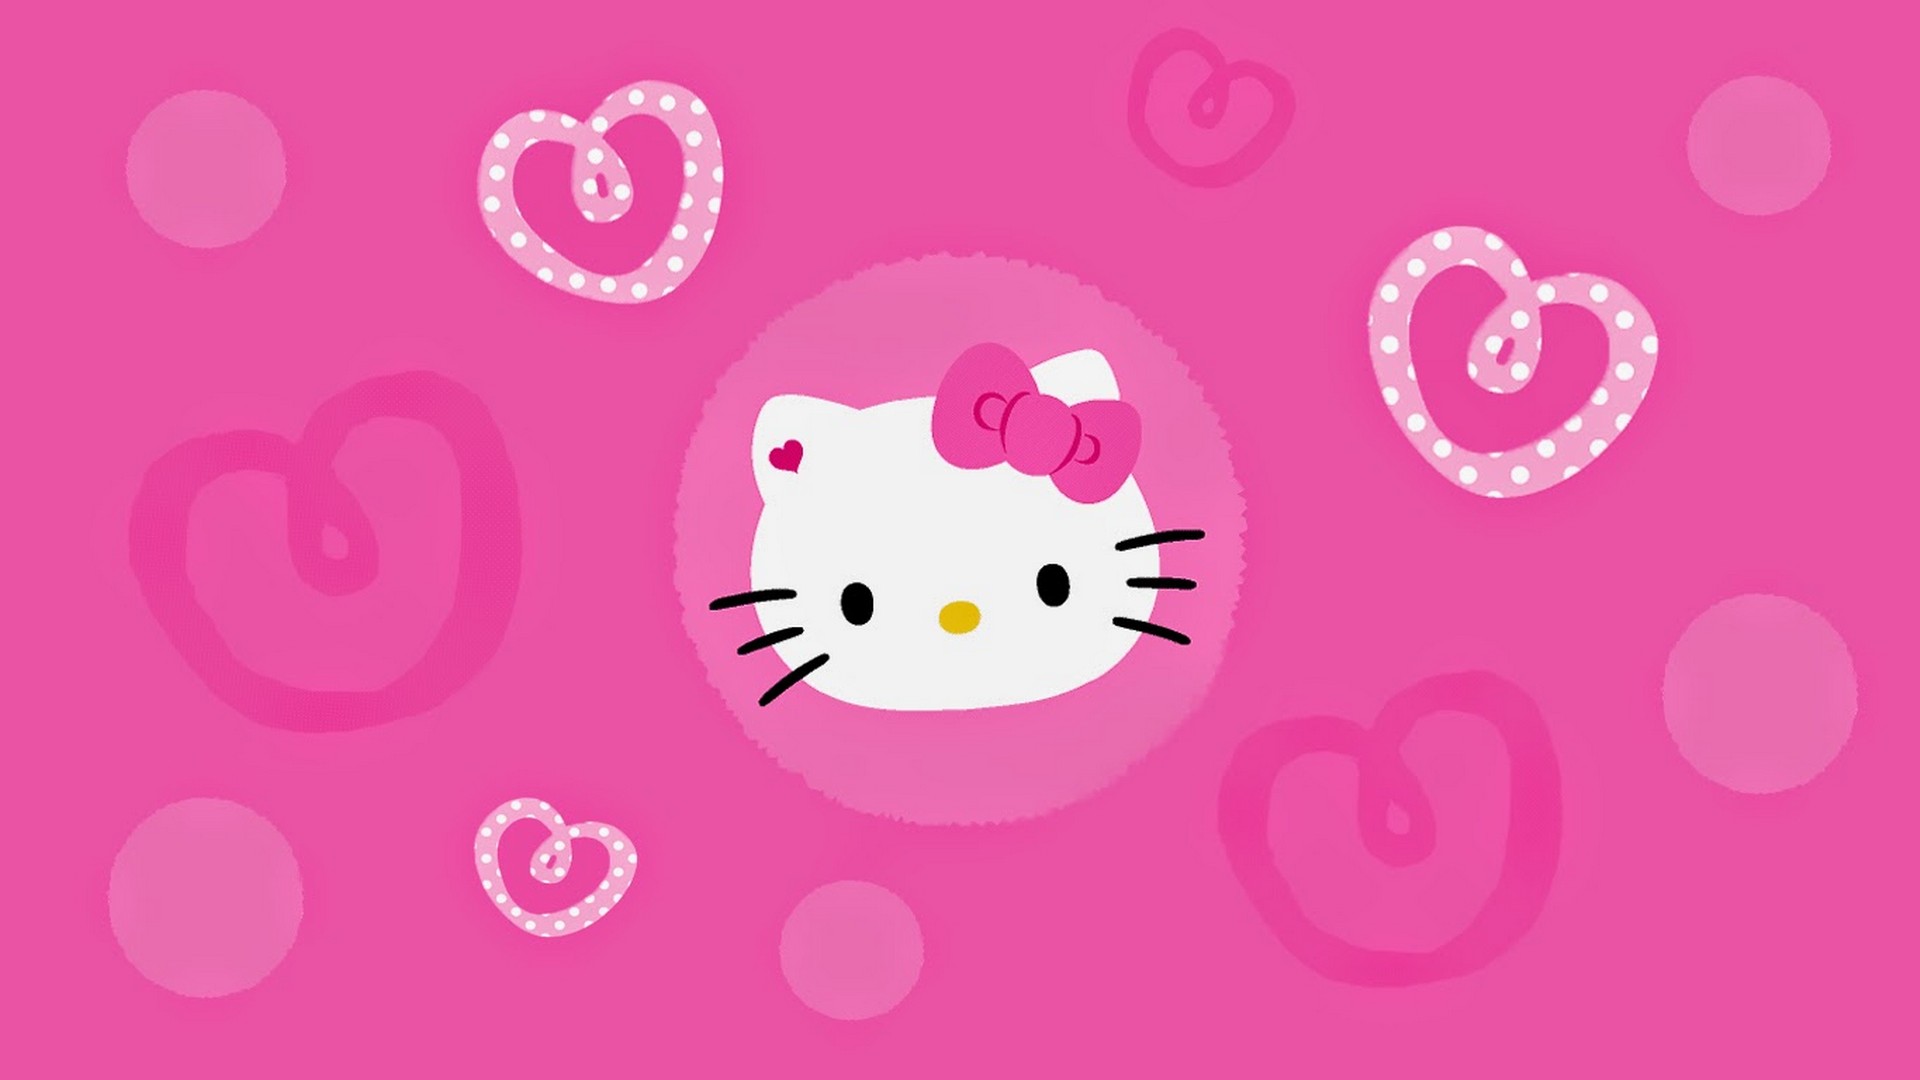 Hello Kitty Pictures Desktop Wallpaper with image resolution 1920x1080 pixel. You can use this wallpaper as background for your desktop Computer Screensavers, Android or iPhone smartphones